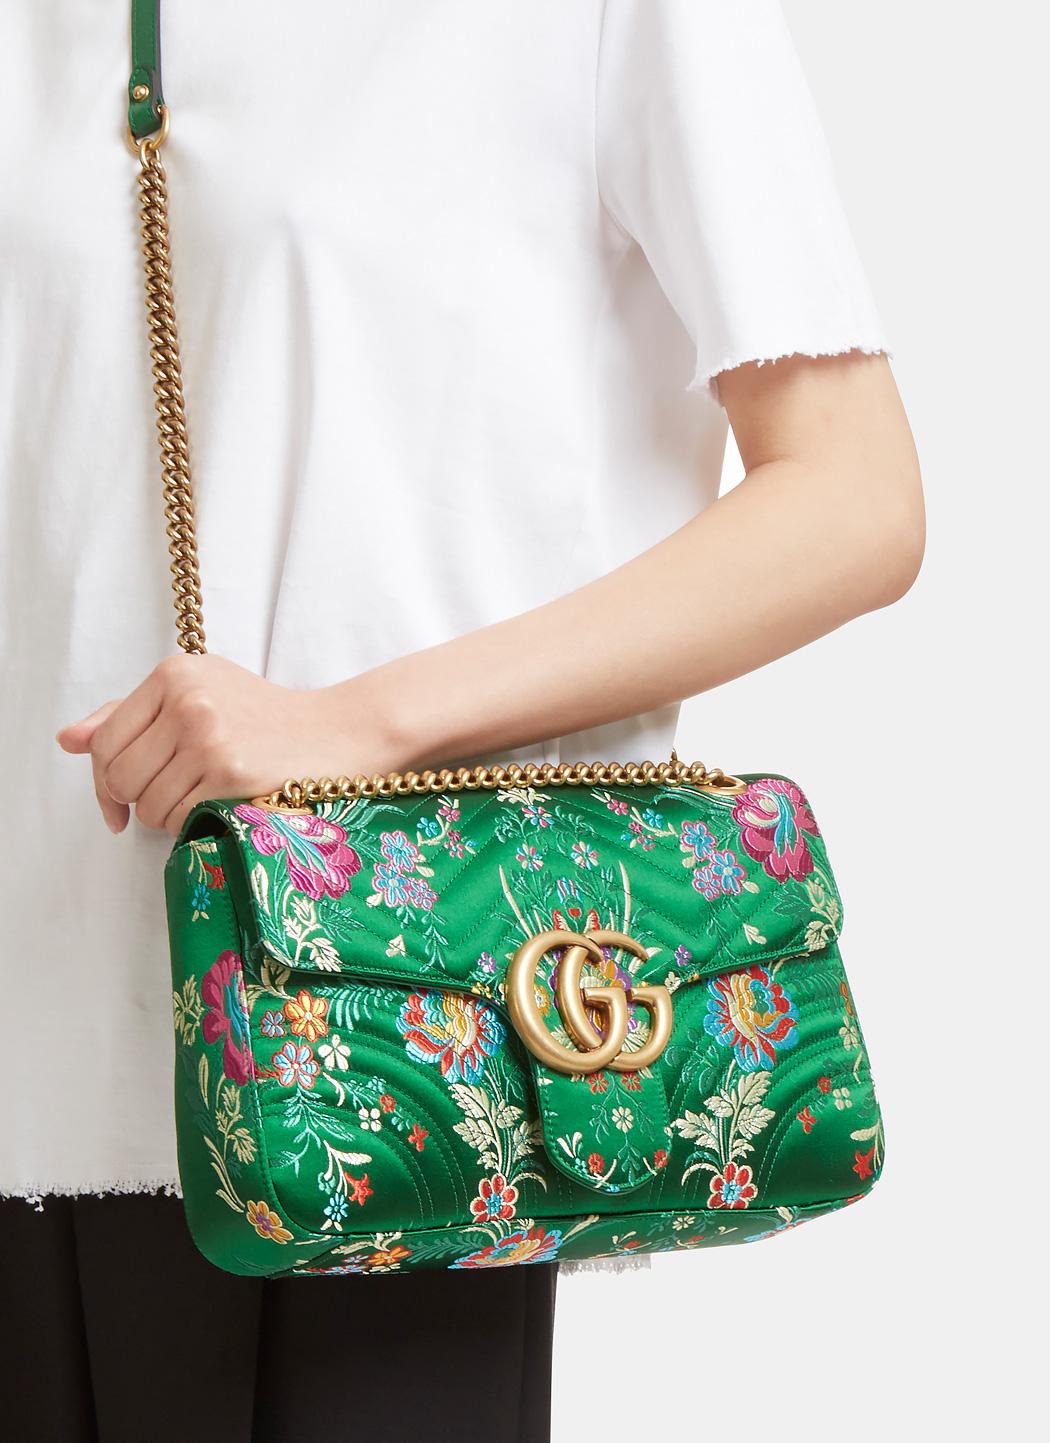 Gucci Suede Gg Marmont Floral Jacquard Shoulder Bag in Green | Lyst